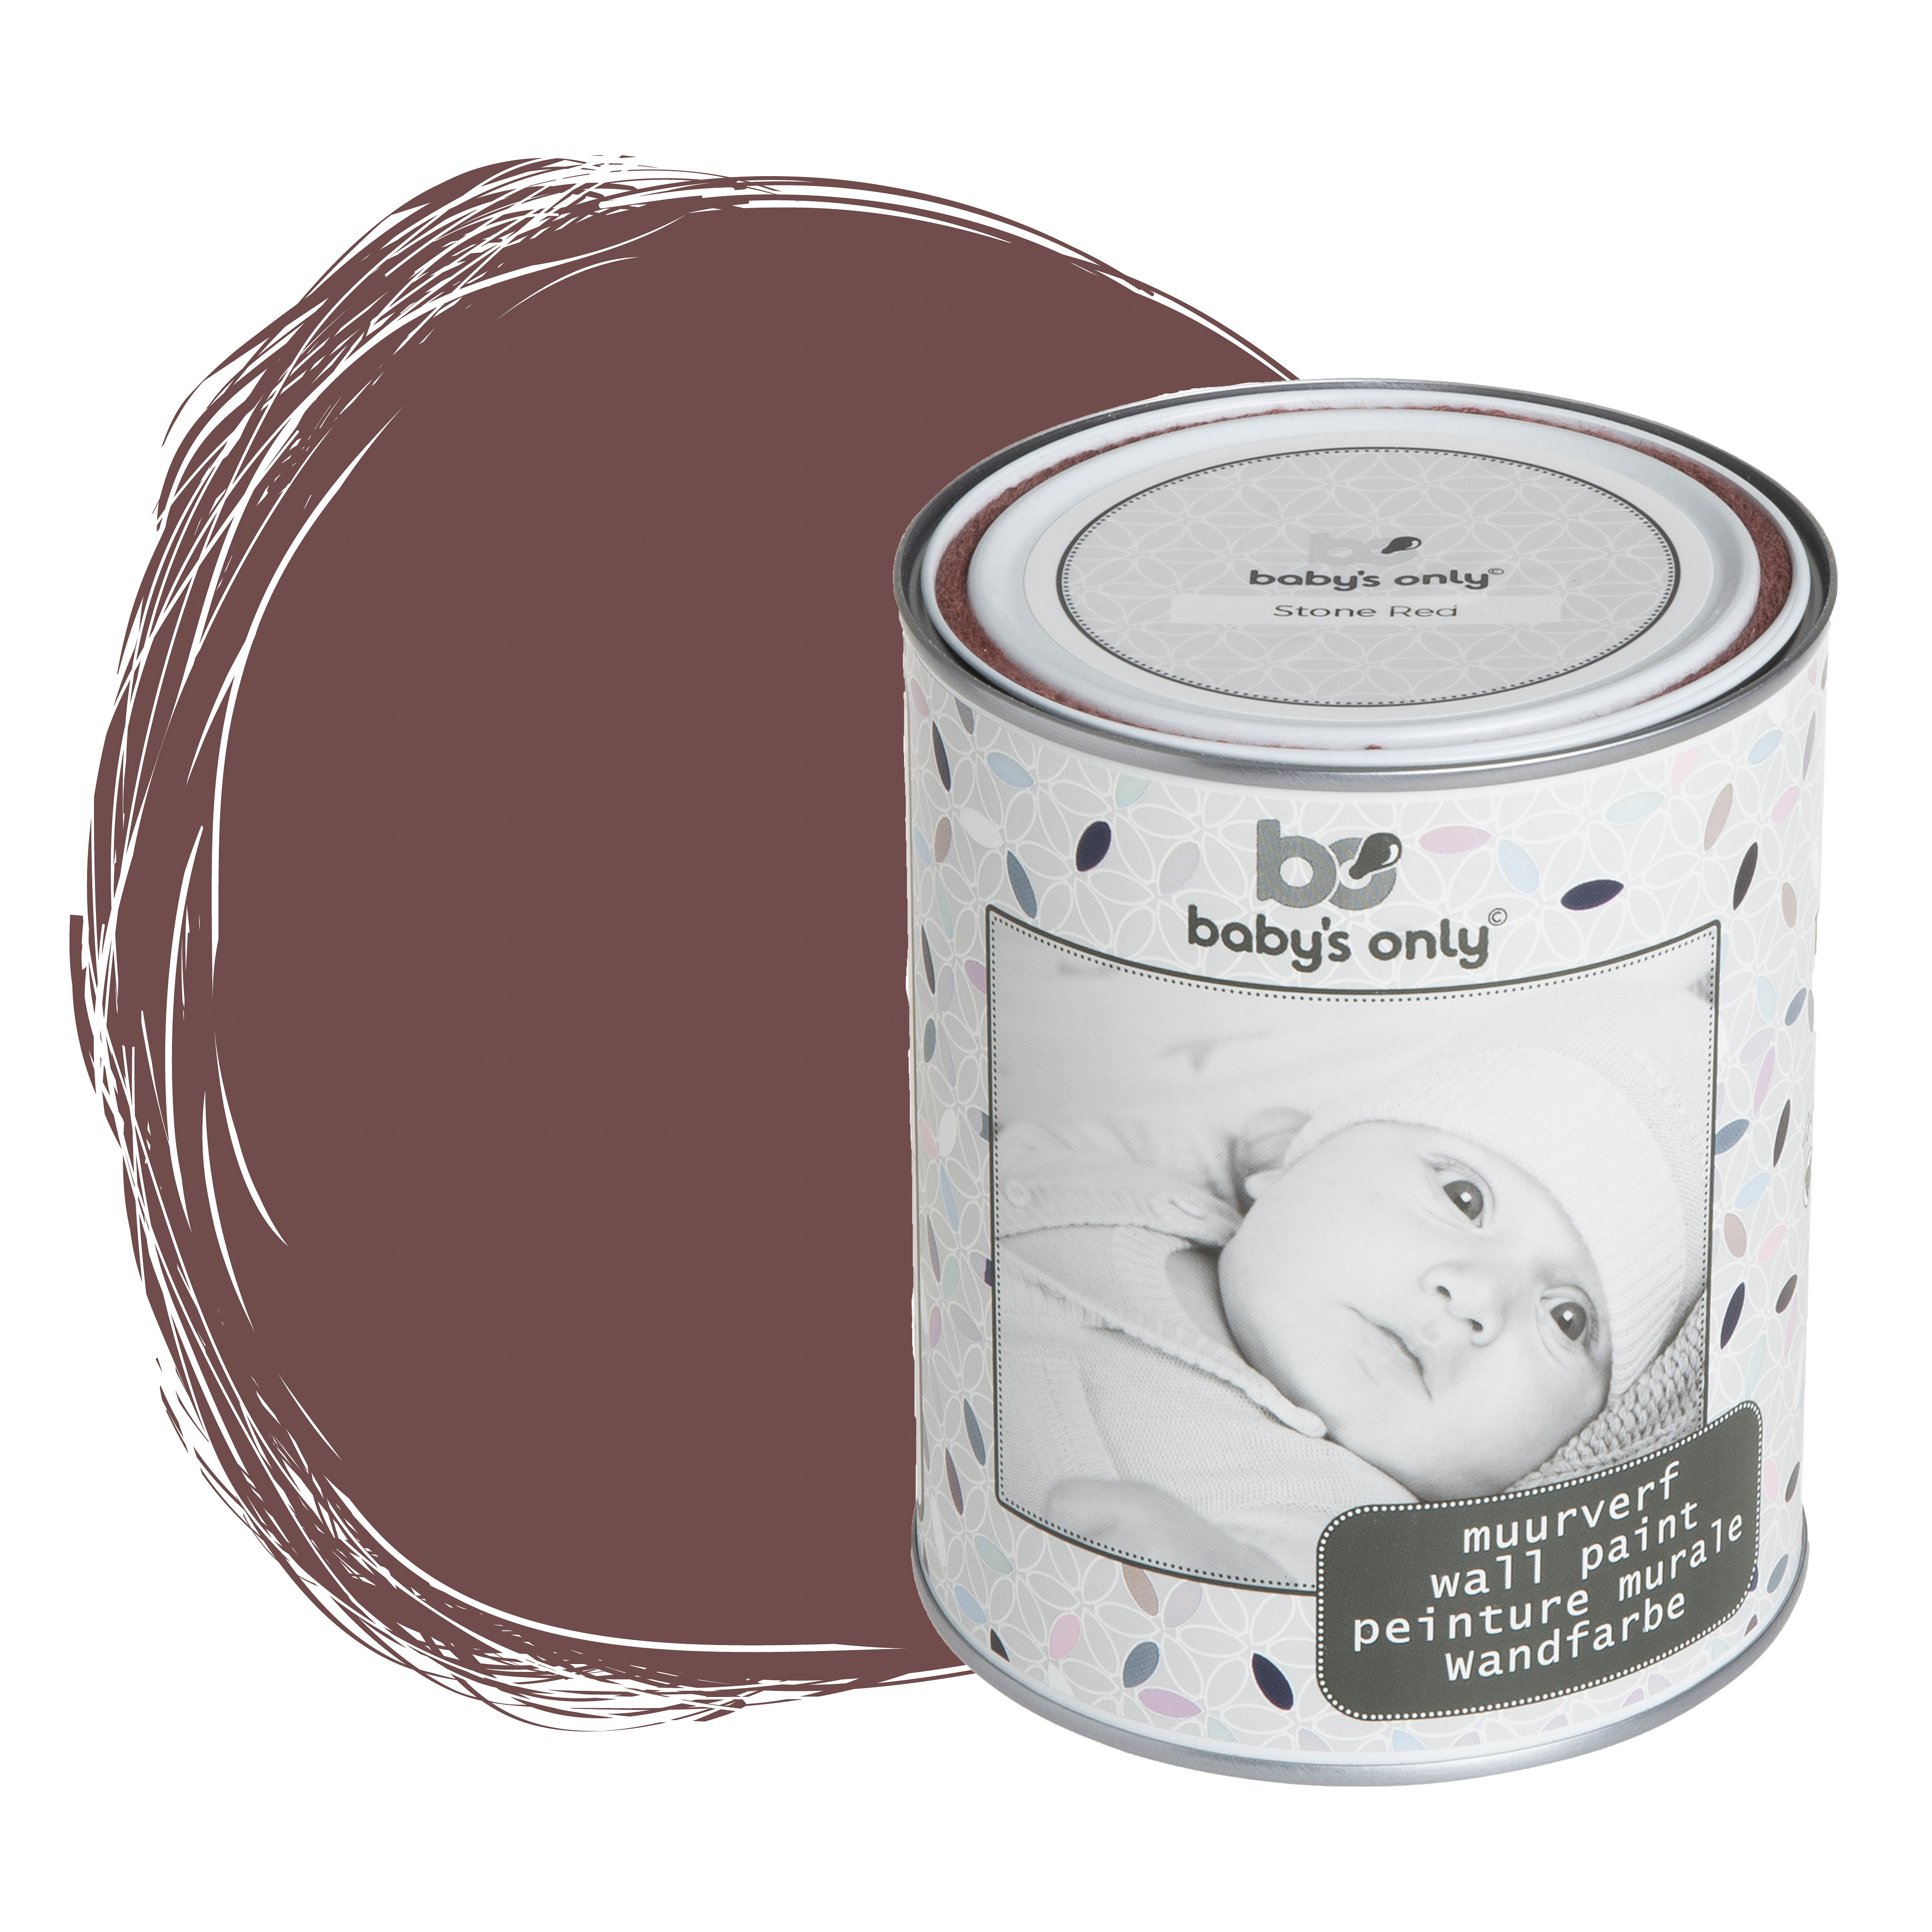 Wall paint stone red - 1 liter